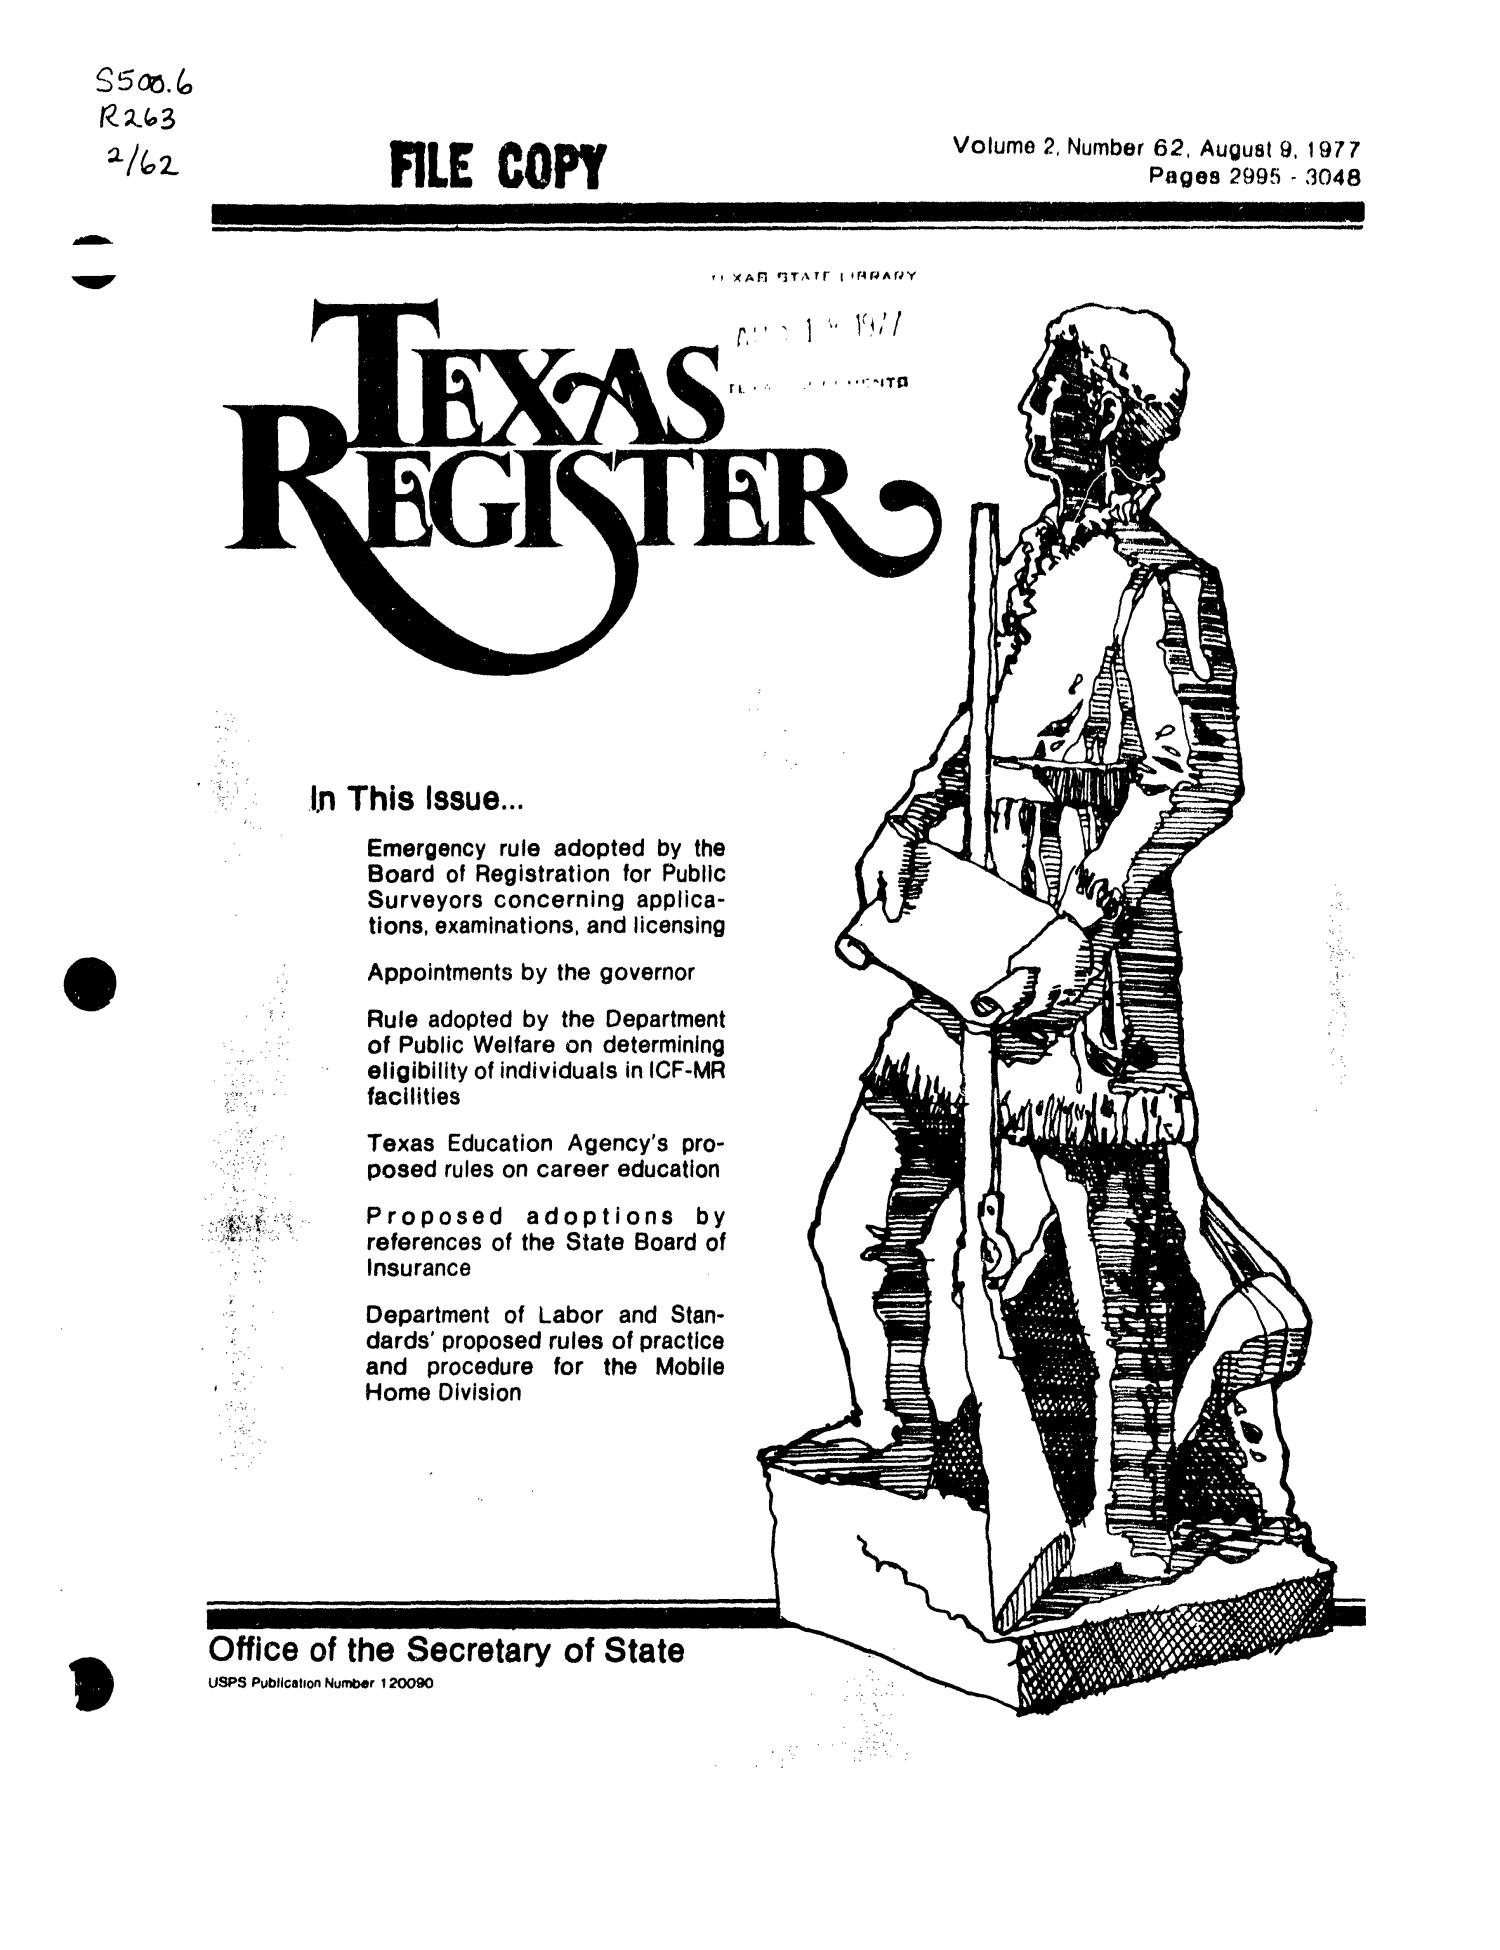 Texas Register, Volume 2, Number 62, Pages 2995-3048, August 9, 1977
                                                
                                                    Title Page
                                                